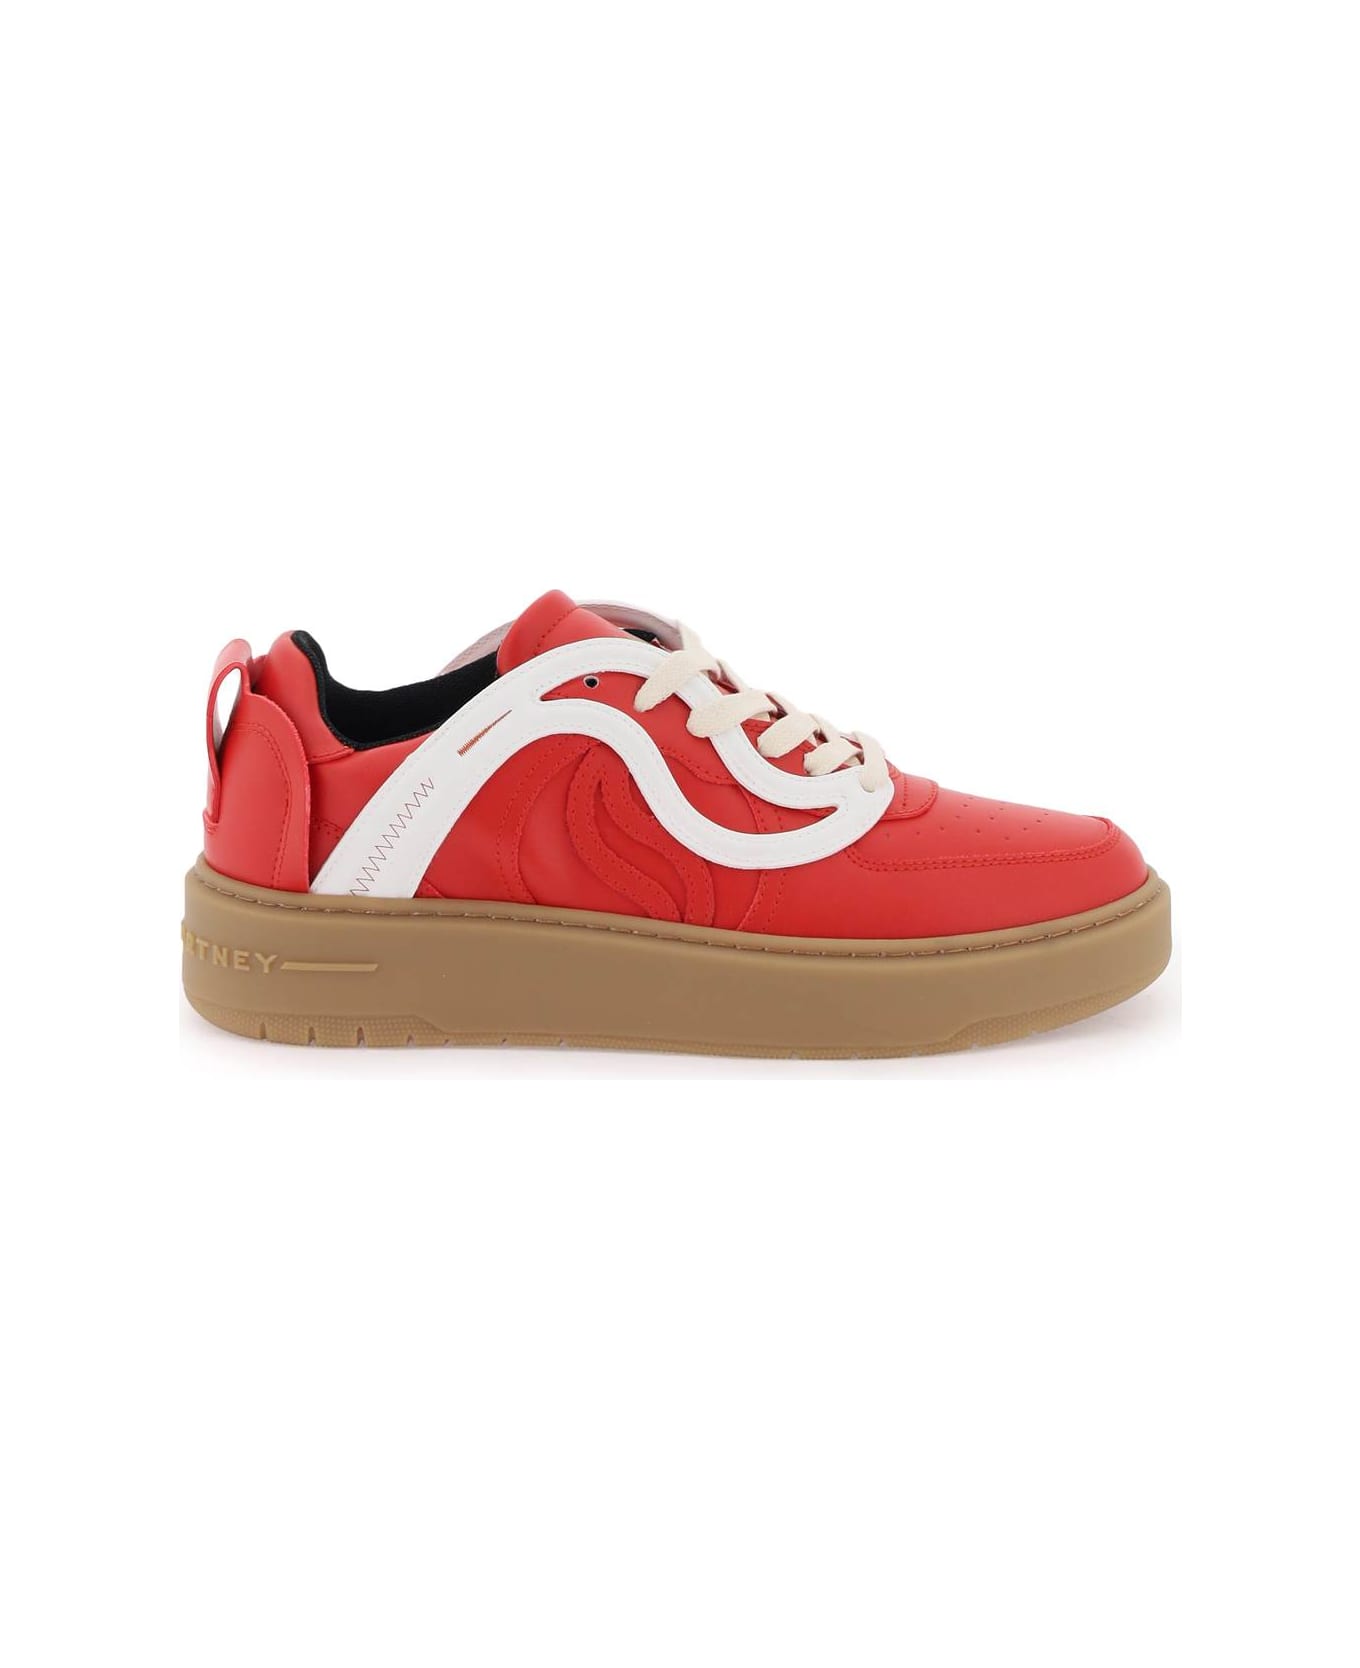 Stella McCartney S-wave Low-top Sneakers - REDWHITE (Red)